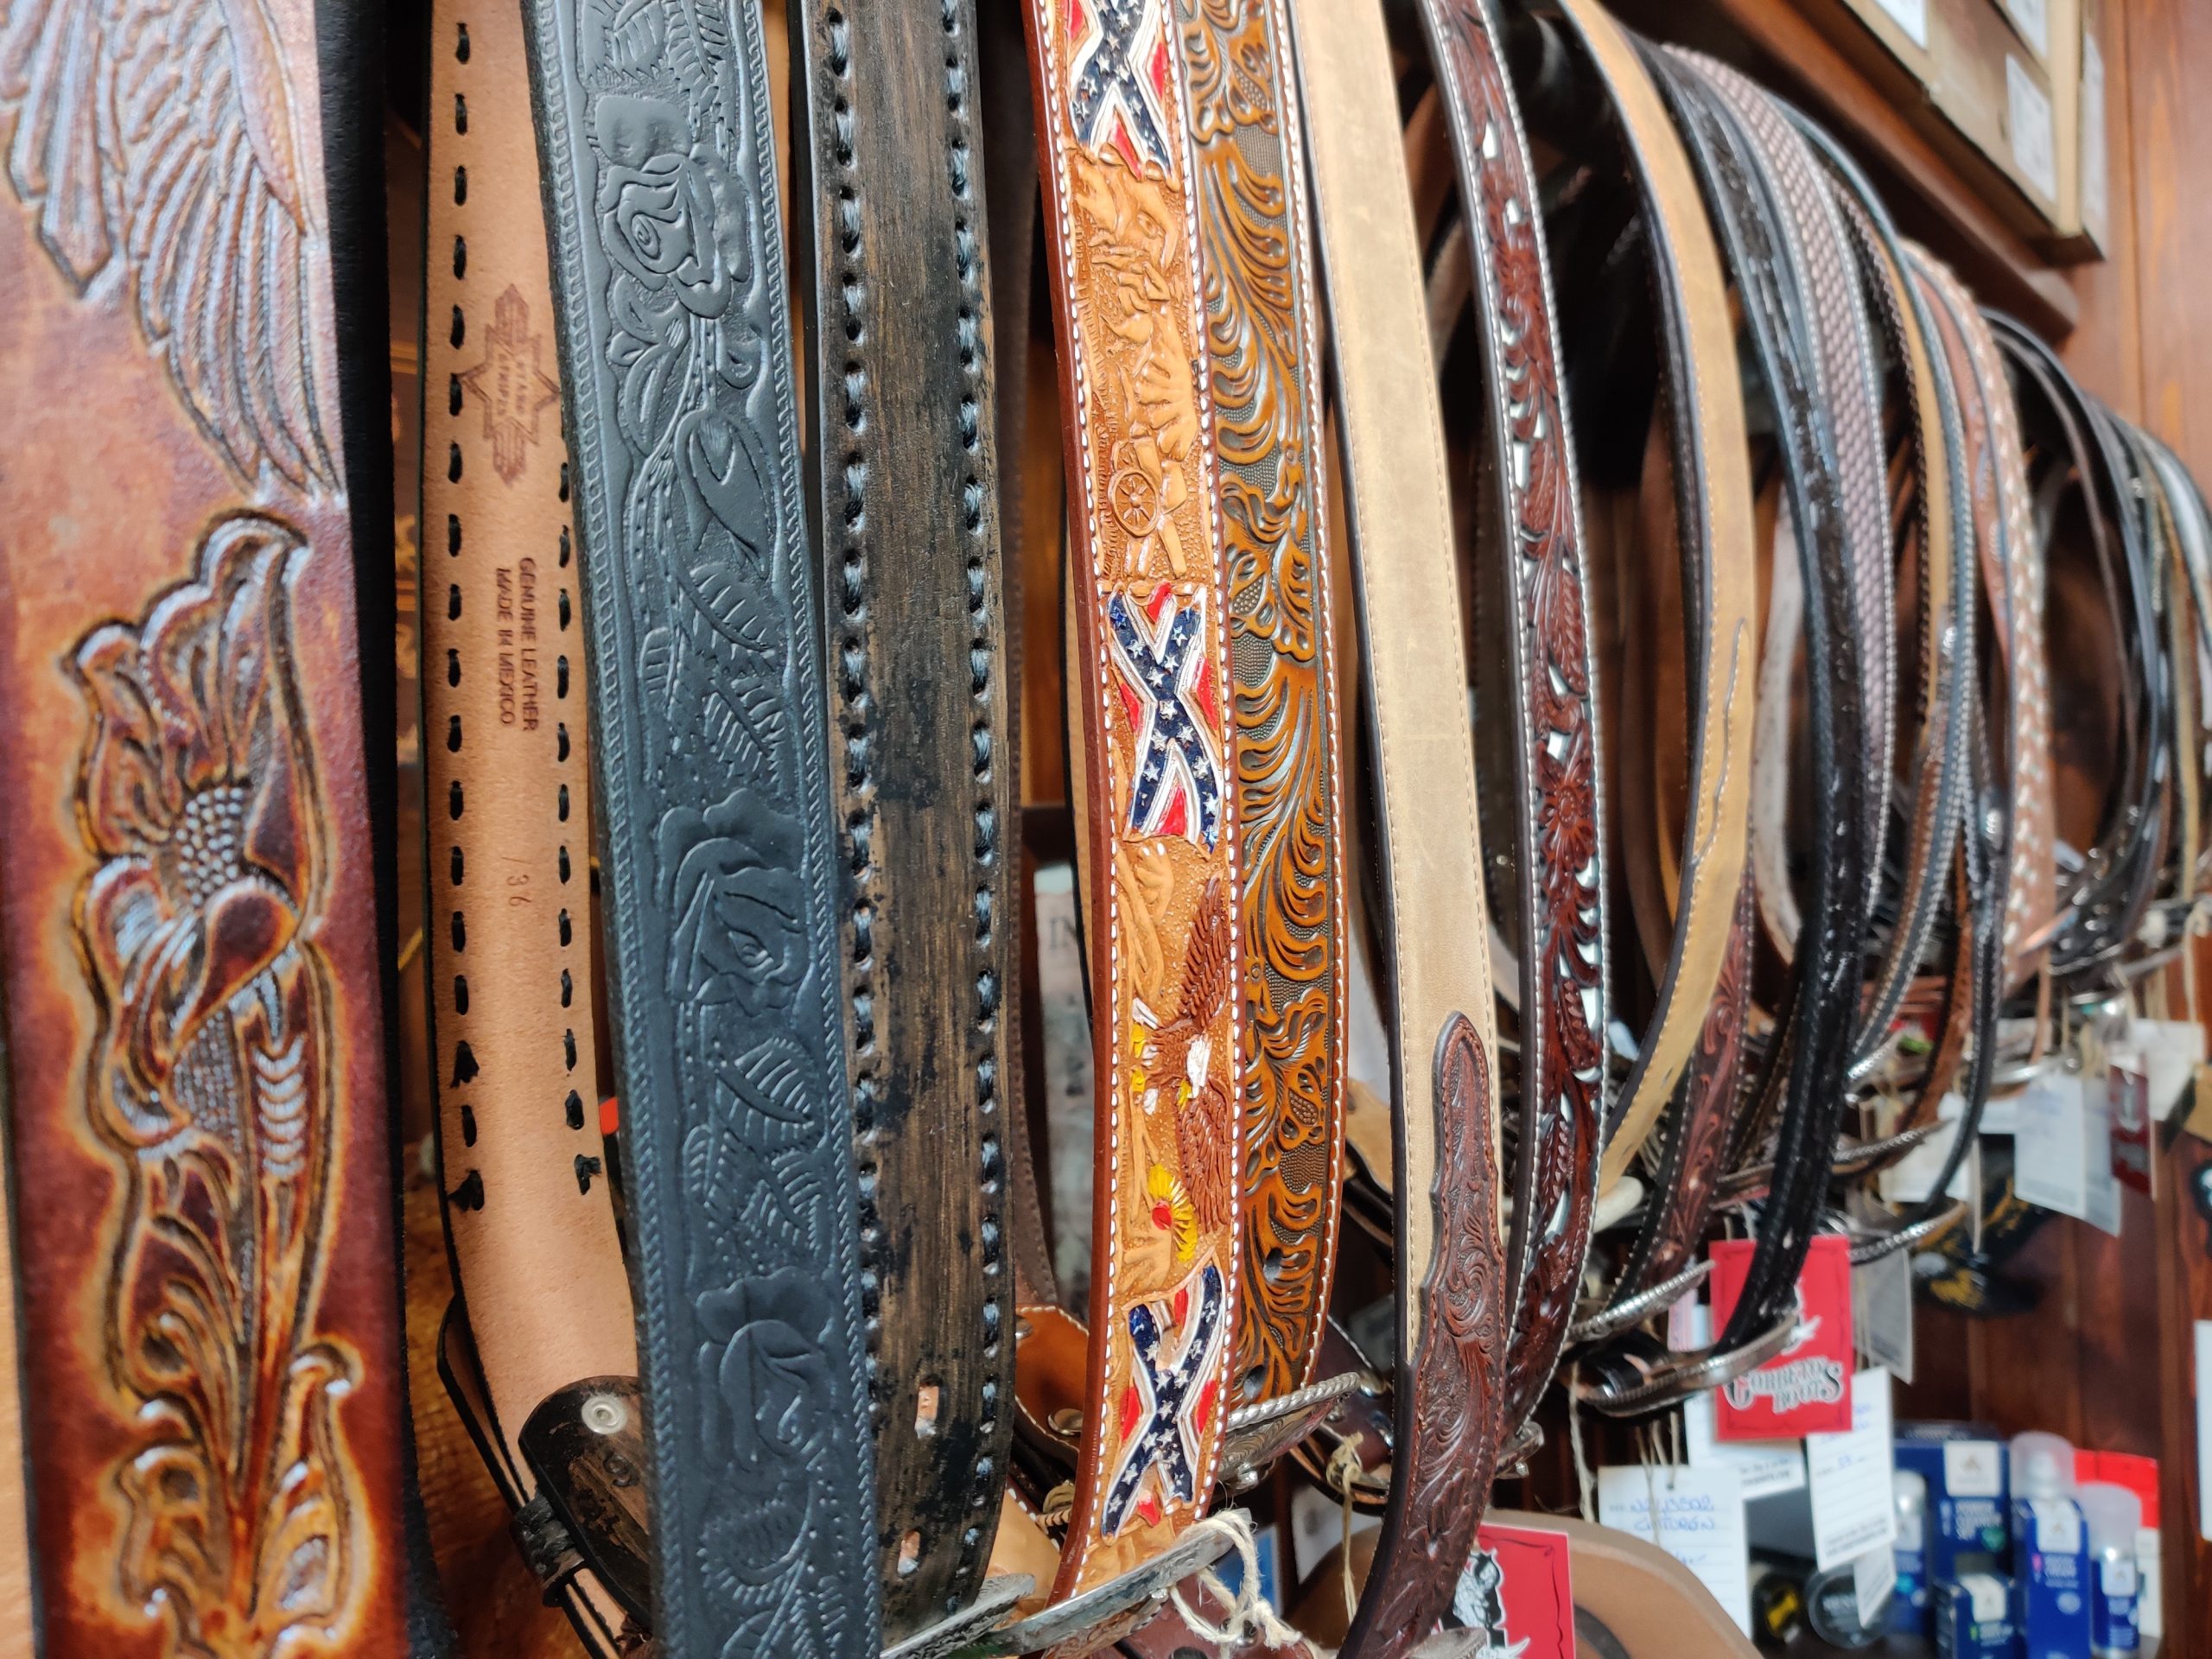 Snap On Western Cowgirl Snake Texture Leather Belt